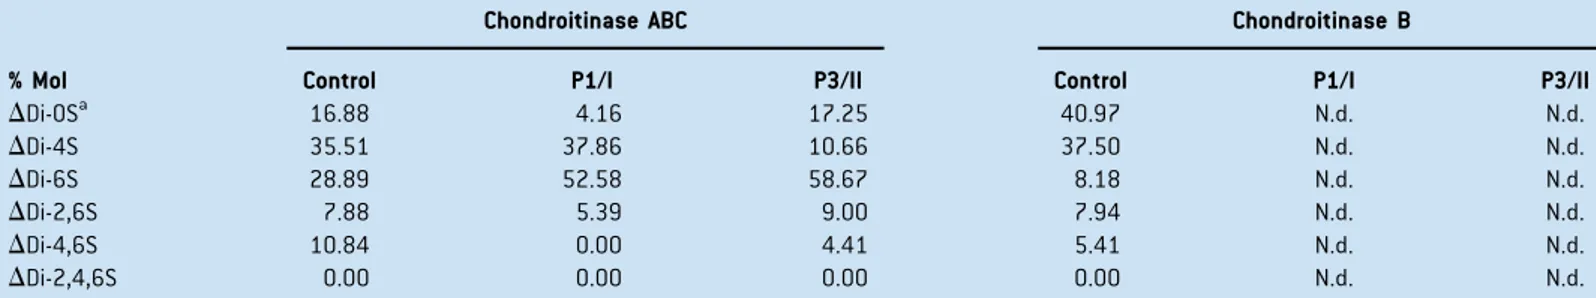 TABLE II. Composition Analysis of Chondroitin/Dermatan Disaccharides in Fibroblasts of P3/II